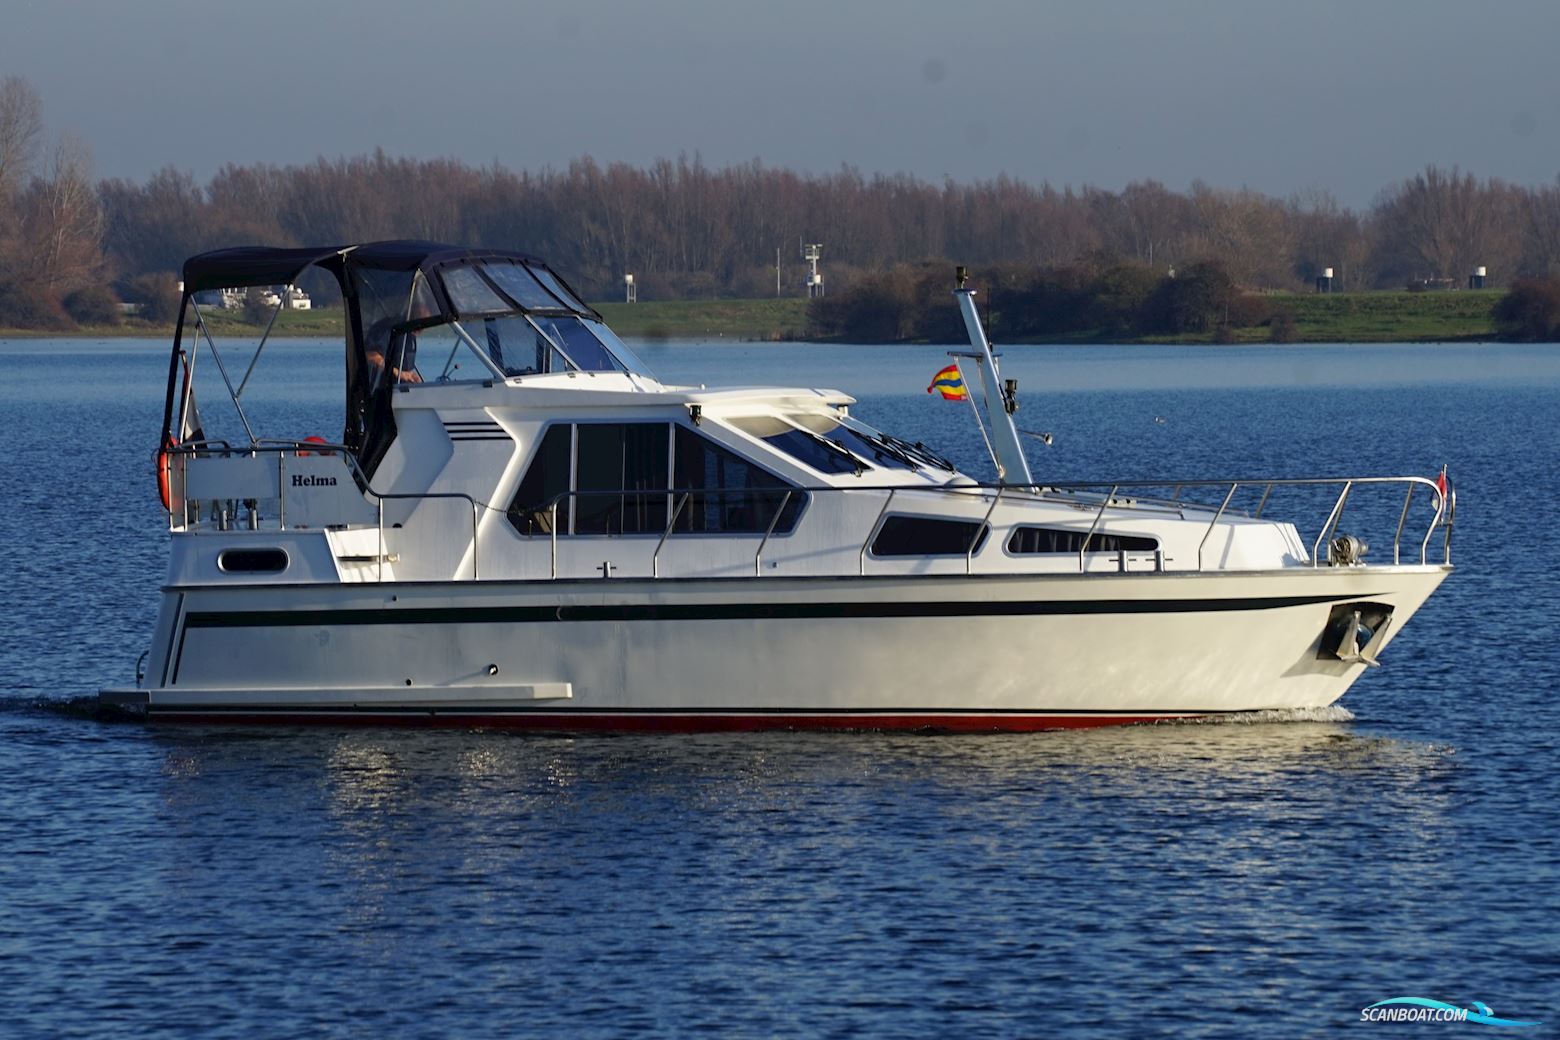 Almarine 1000 Motor boat 1998, with Sole engine, The Netherlands